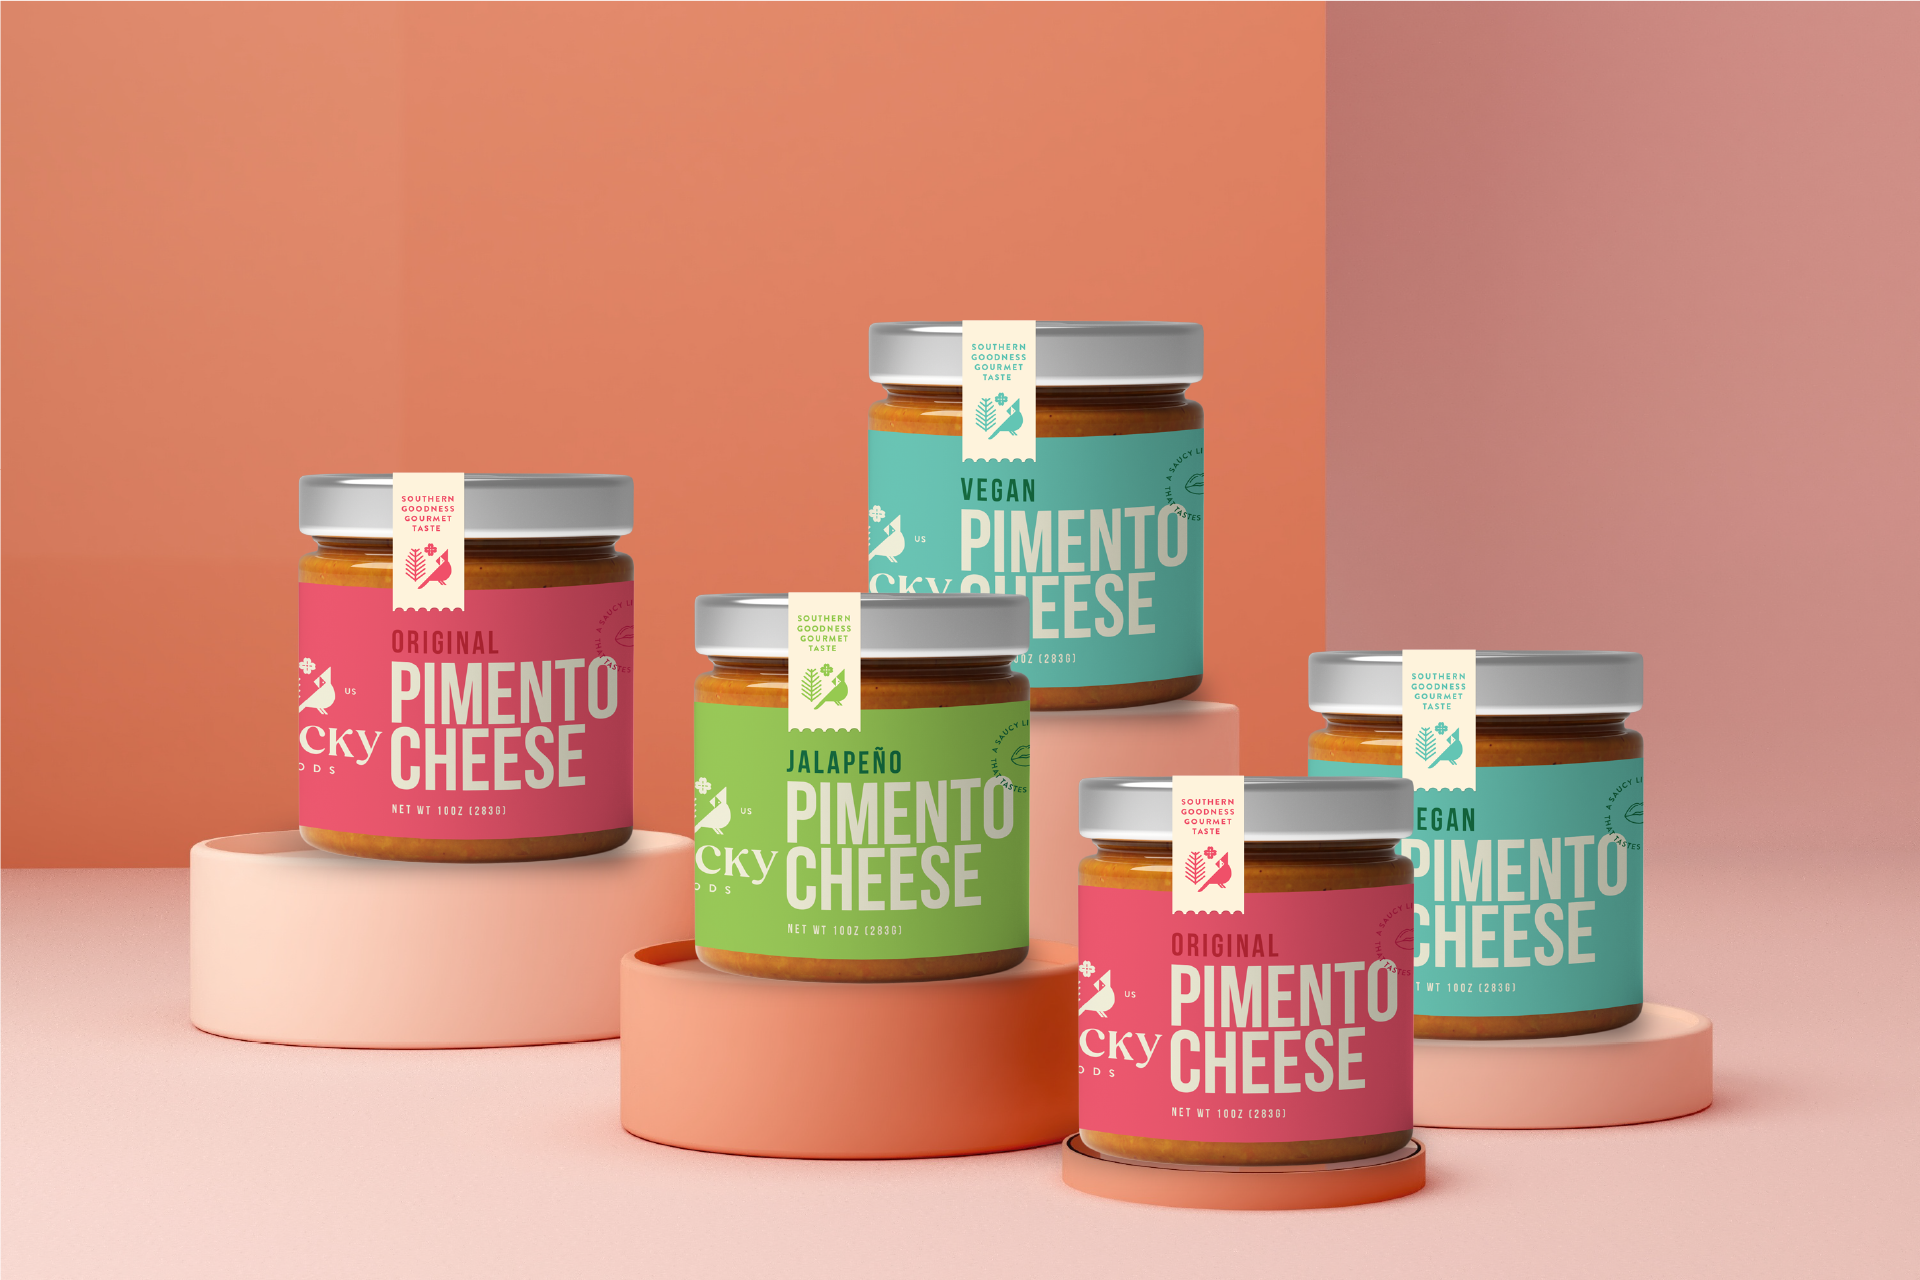 Mindful & Good’s Artful Packaging Design for Finicky Foods